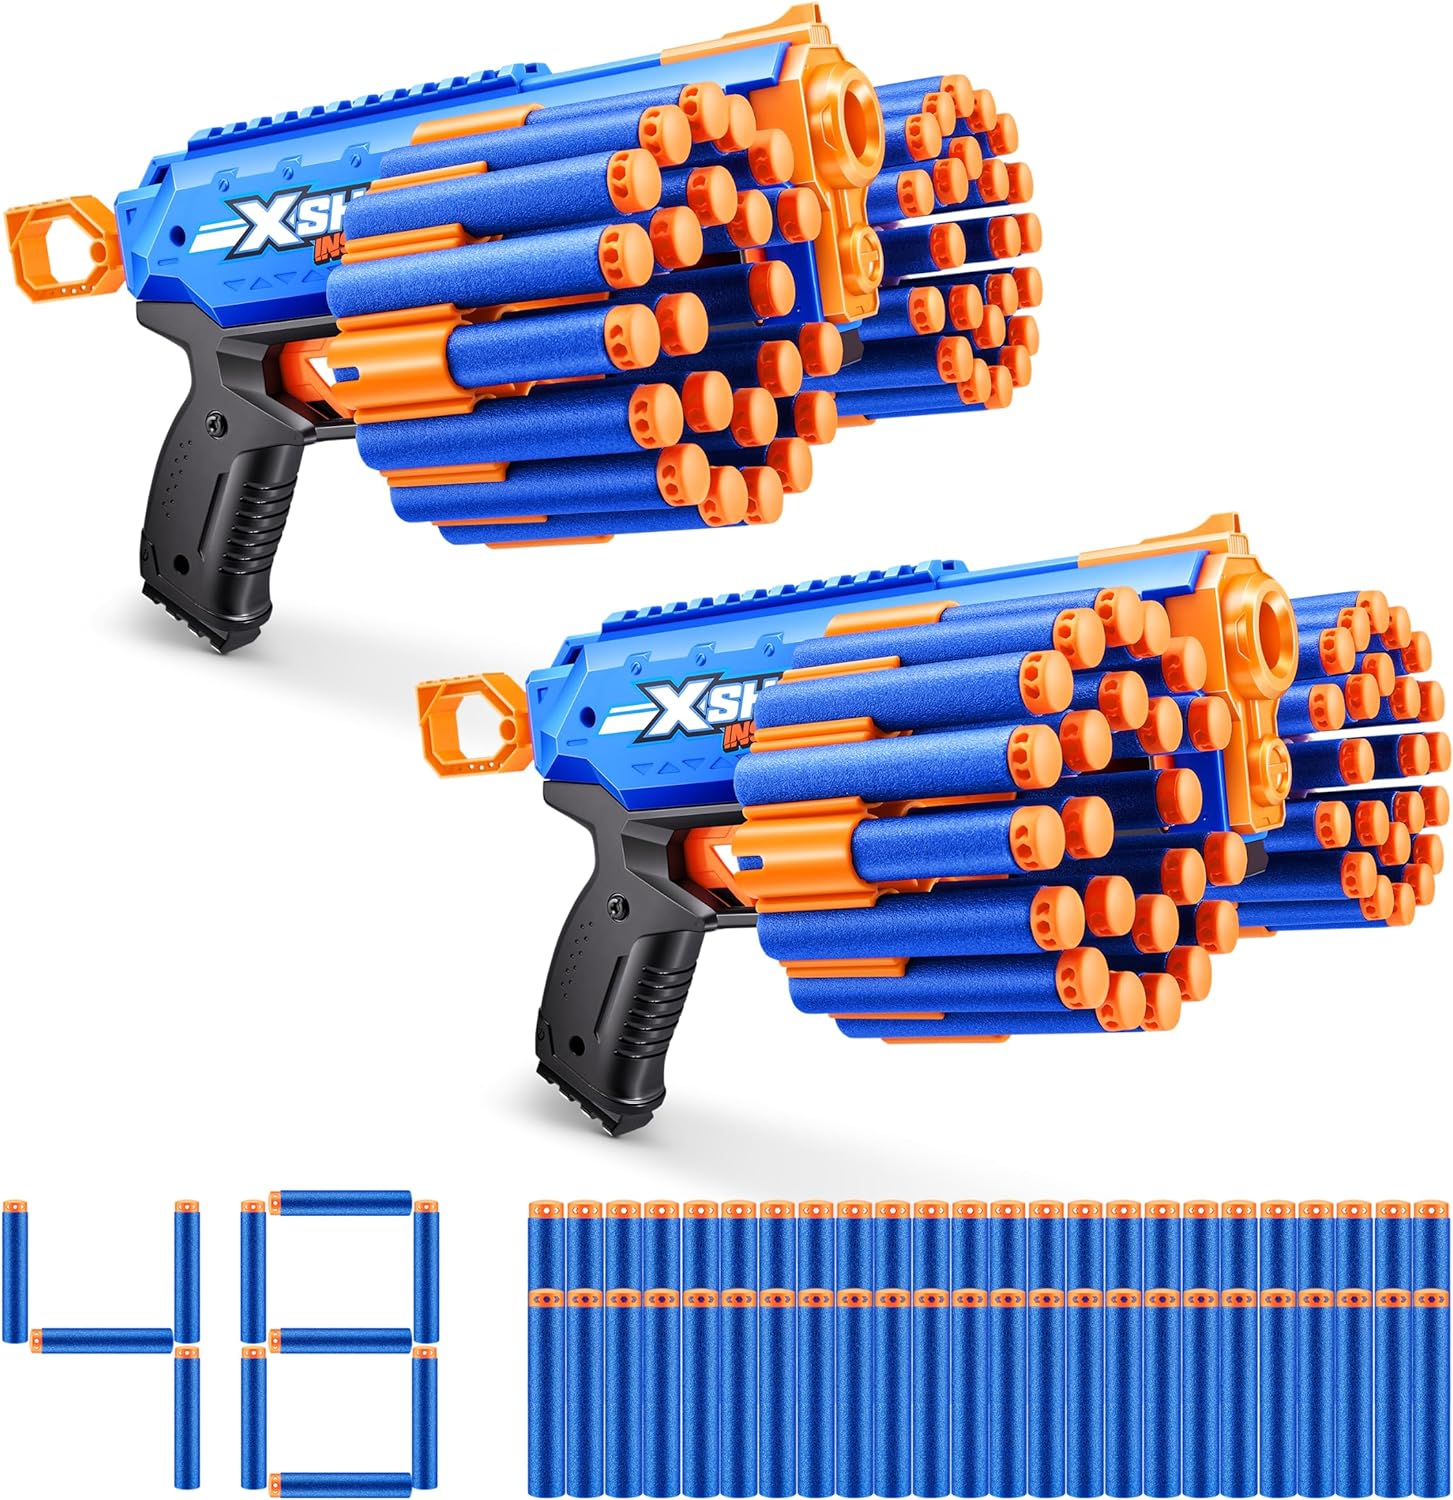 X-Shot Insanity Manic Blaster Dual Pack by ZURU with 48 Darts, Air Pocket Technology Darts and Dart Storage, Outdoor Toy for Boys and Girls, Teens and Adults